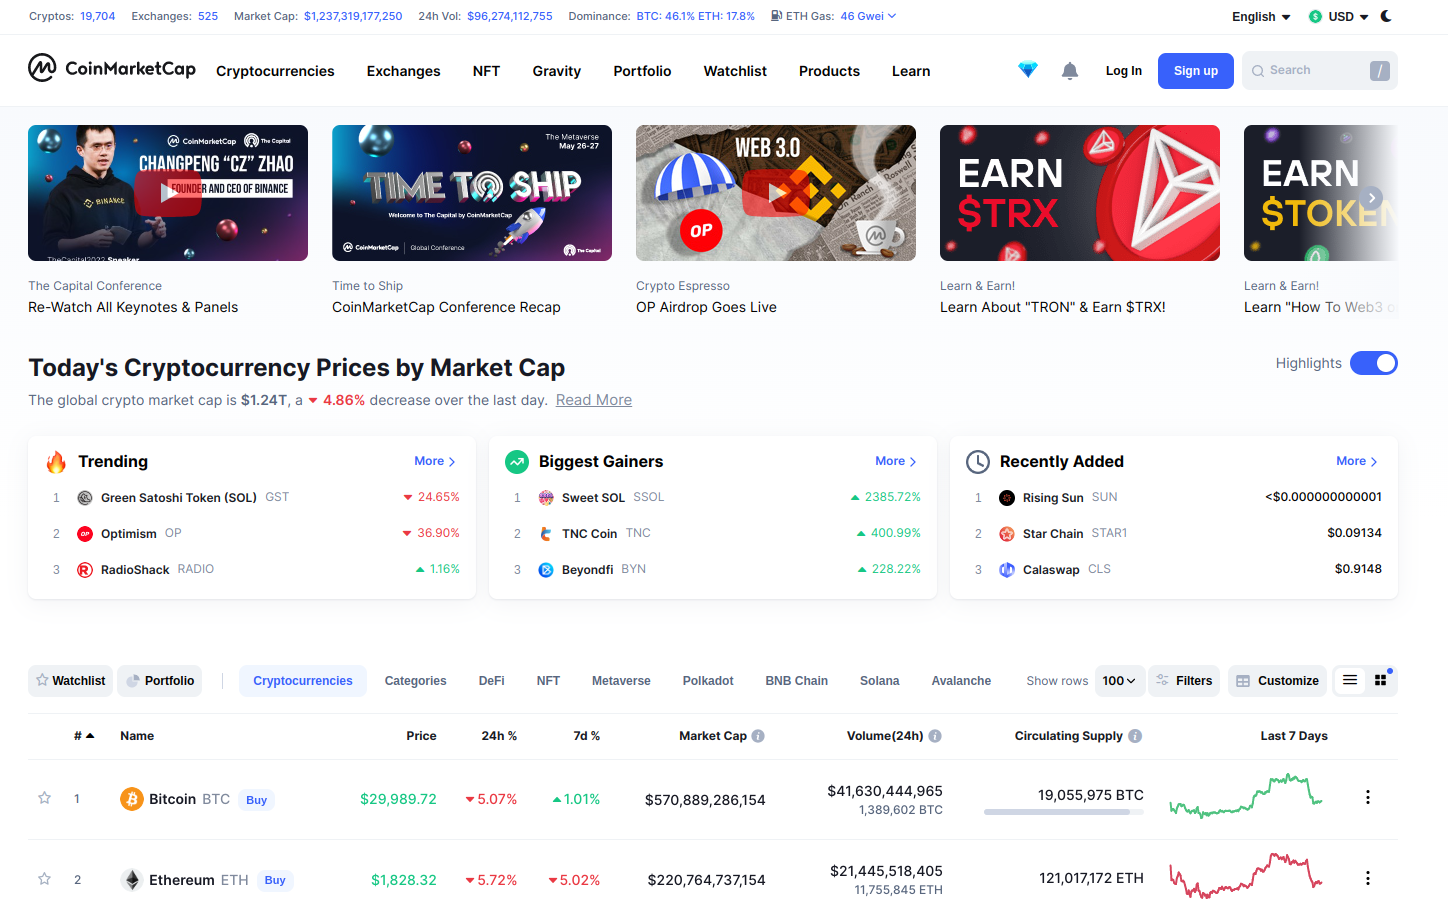 The CoinMarketCap investment website features detailed stock quotes and cryptocurrency market data